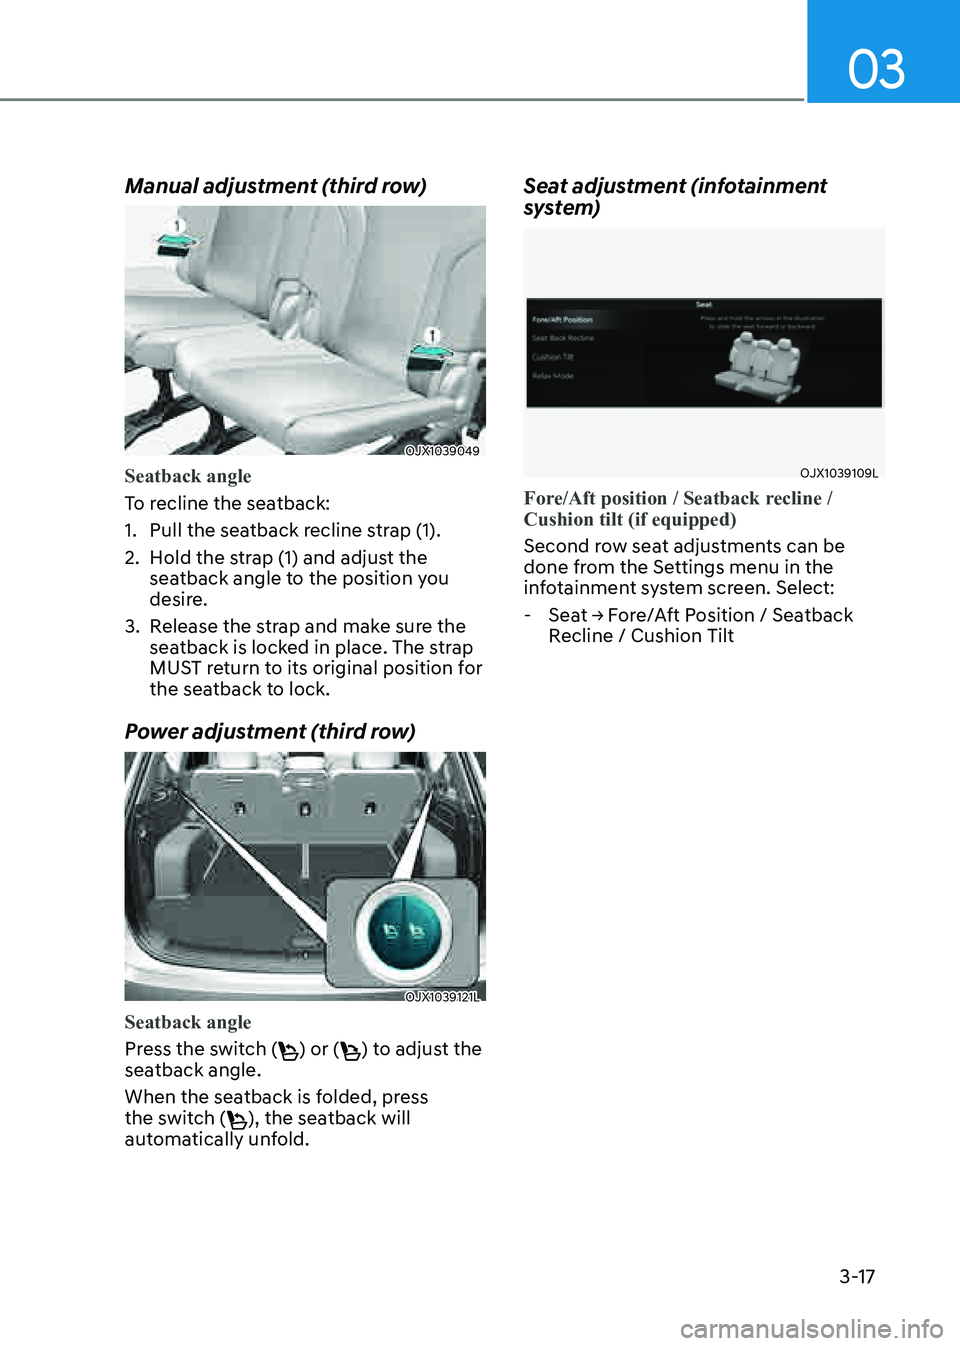 GENESIS GV80 2021  Owners Manual 03
3-17
Manual adjustment (third row)
OJX1039049OJX1039049
Seatback angle
To recline the seatback:
1. Pull the seatback recline strap (1).
2. Hold the strap (1) and adjust the 
seatback angle to the p